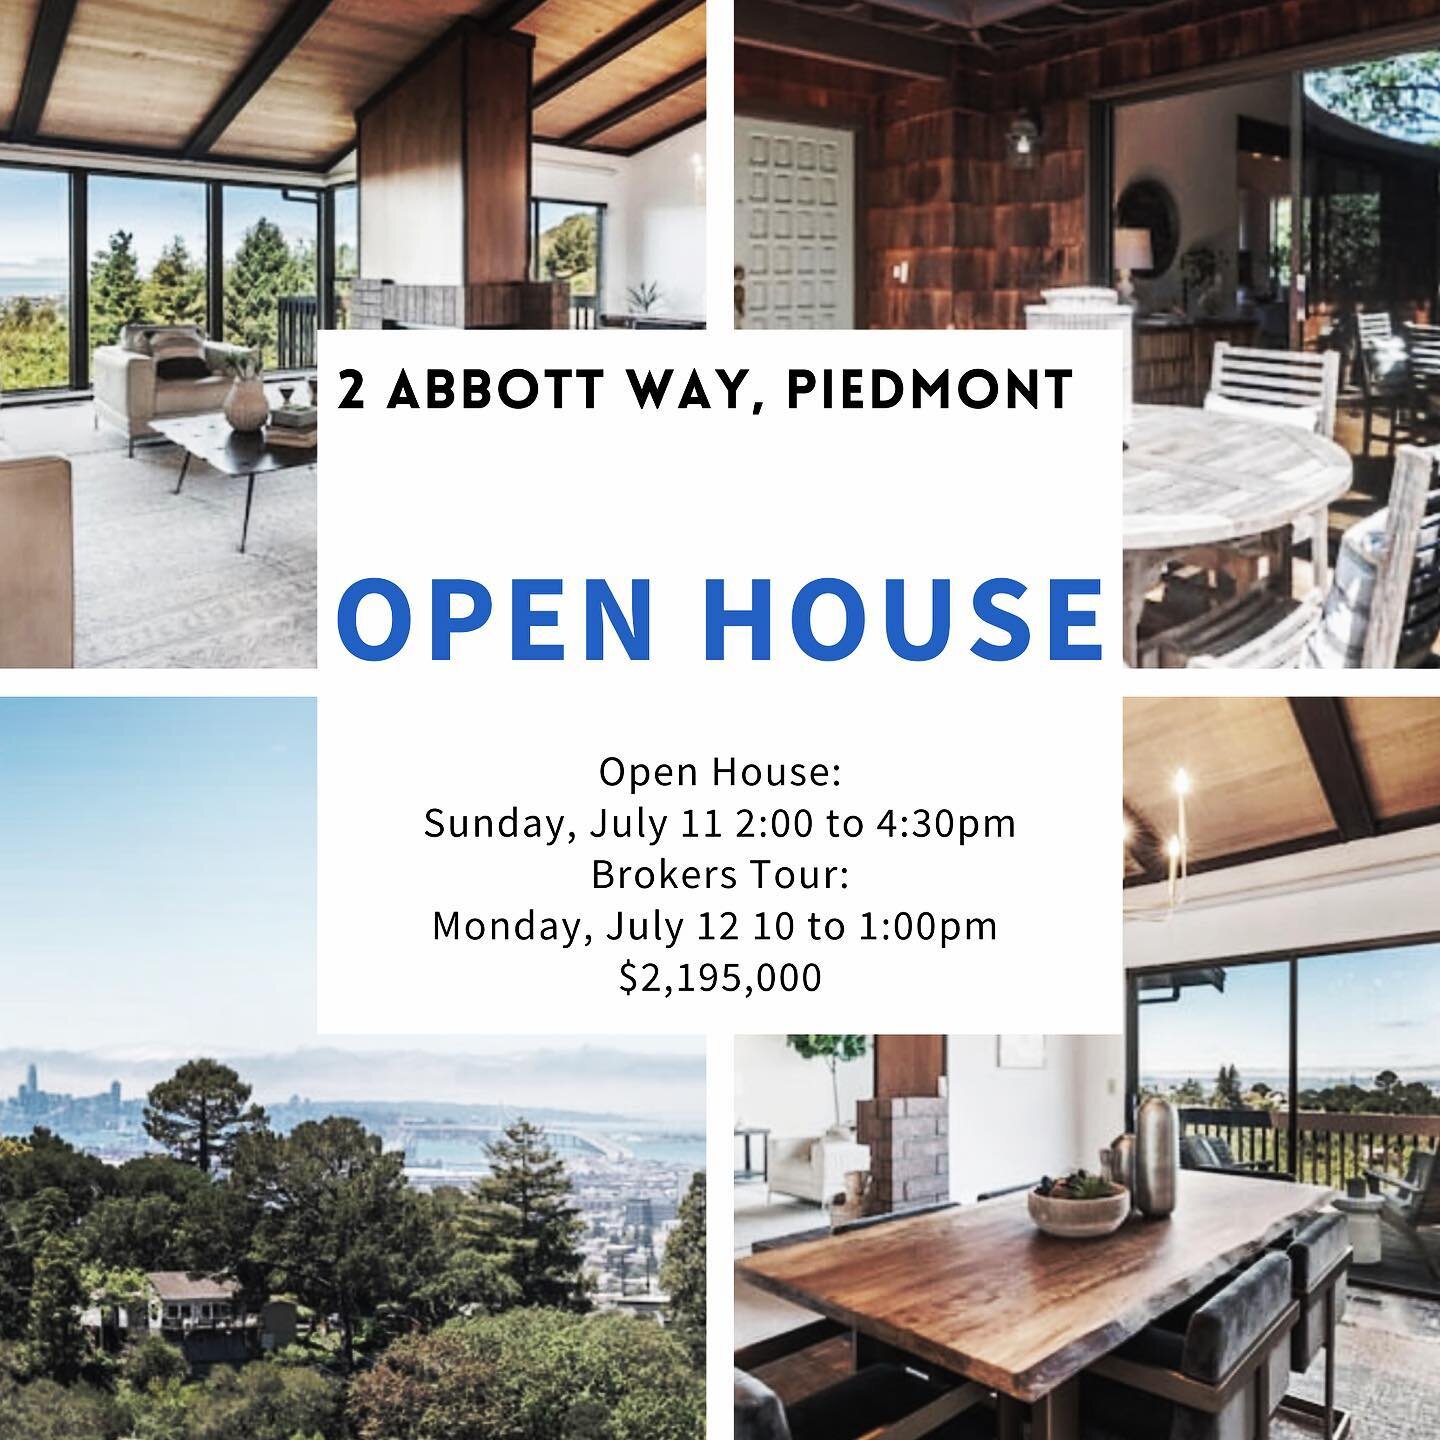 We are back with in-person Open Houses!!! Come check out 2 Abbott Way, Piedmont today from 2-4:30!!!
This Classic Midcentury with Panoramic SF Views is tucked away at the end of a private driveway, the home offers stylish living in a quiet Piedmont l